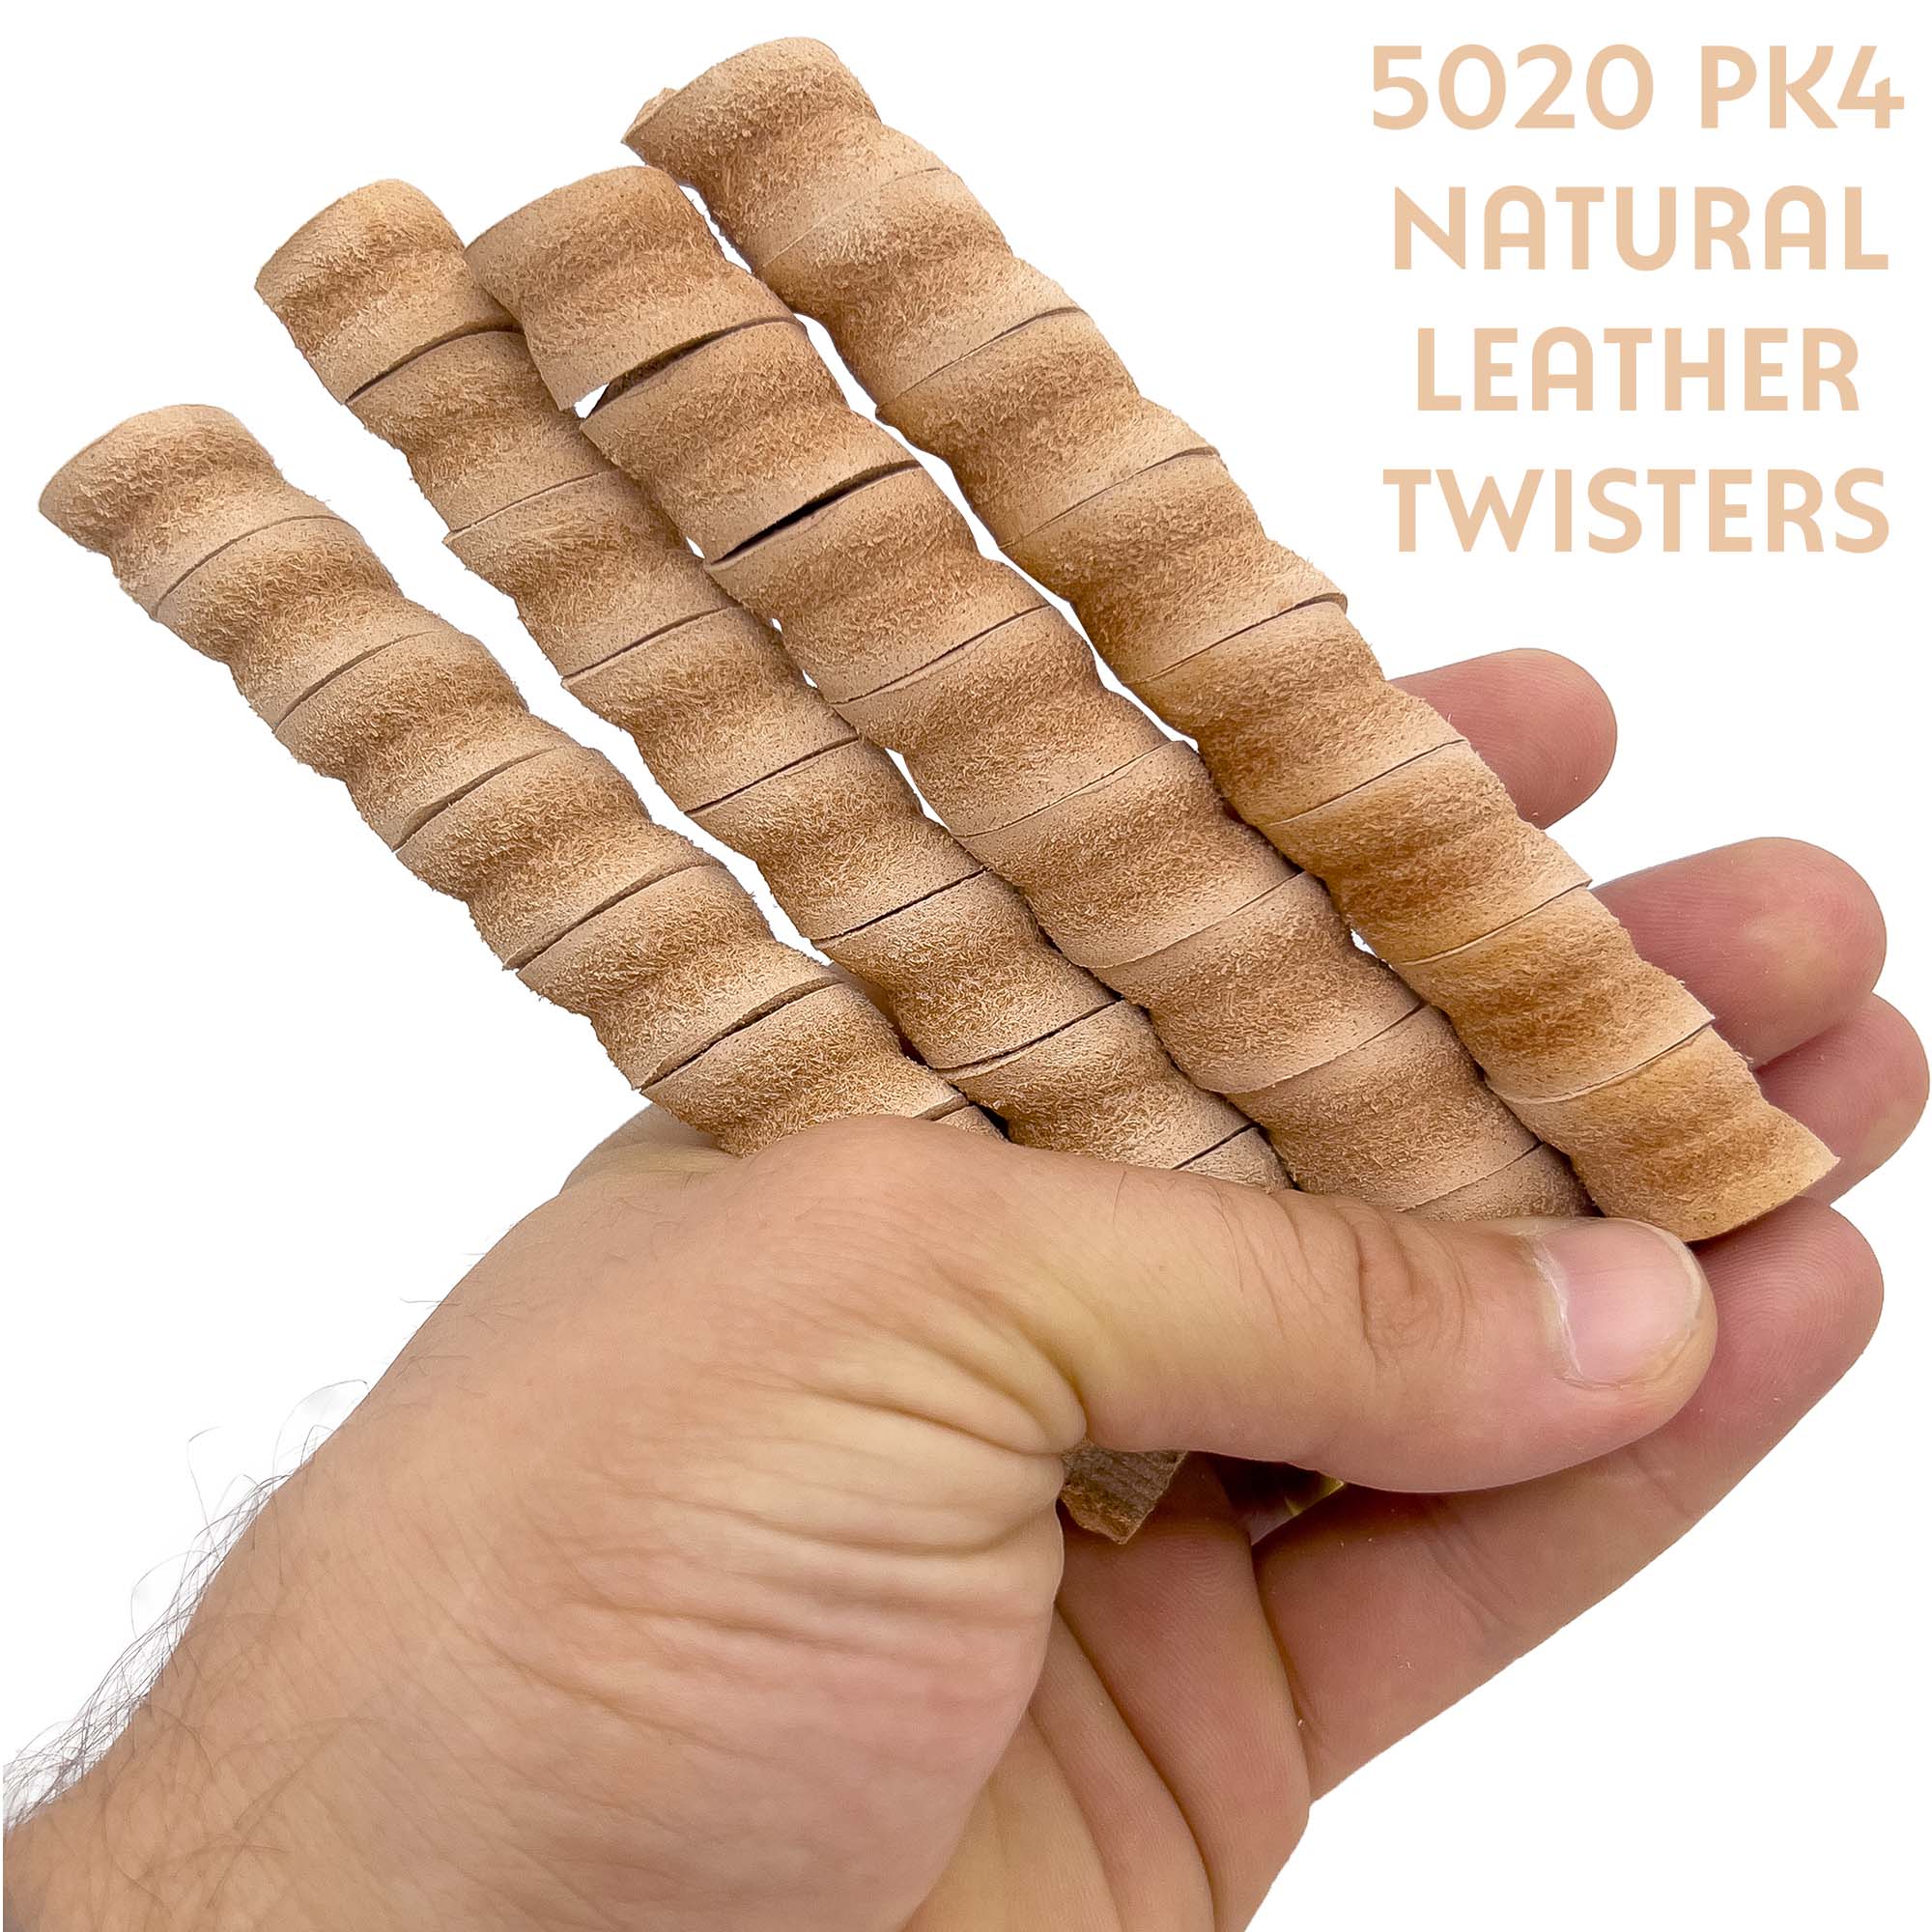 5020 Natural Leather Twisters